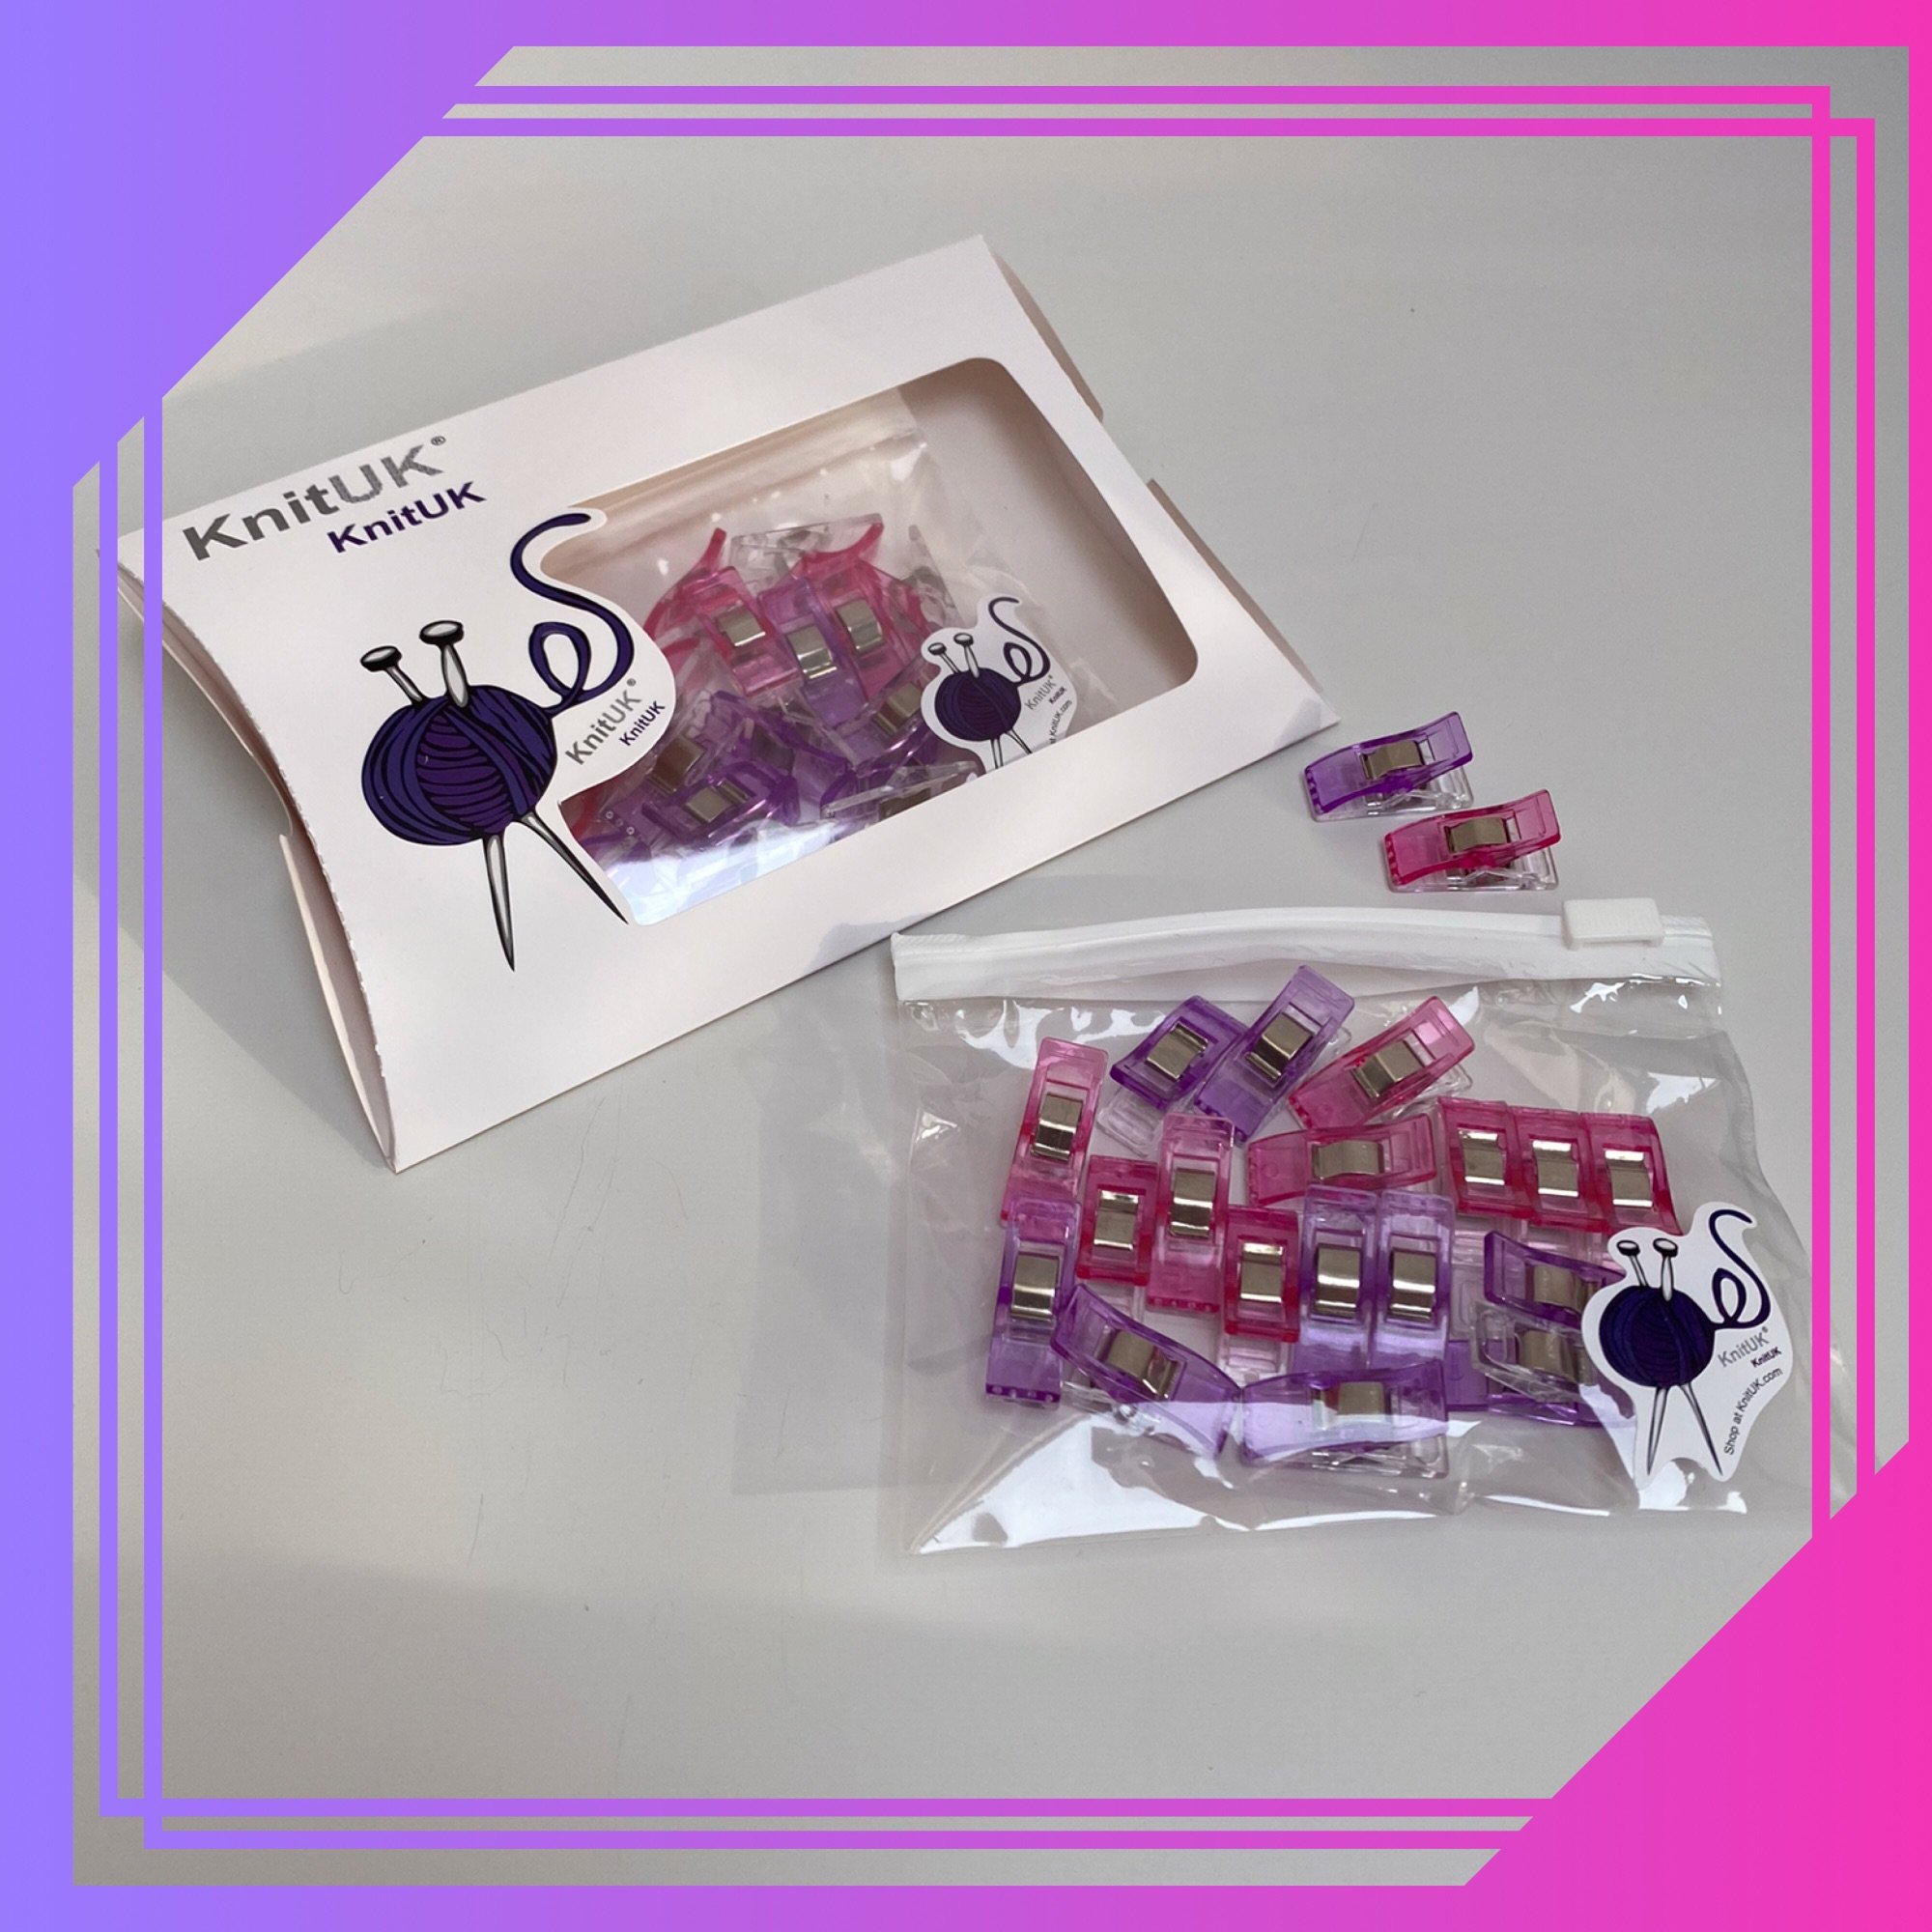 Knituk sewing clips in box pink purple